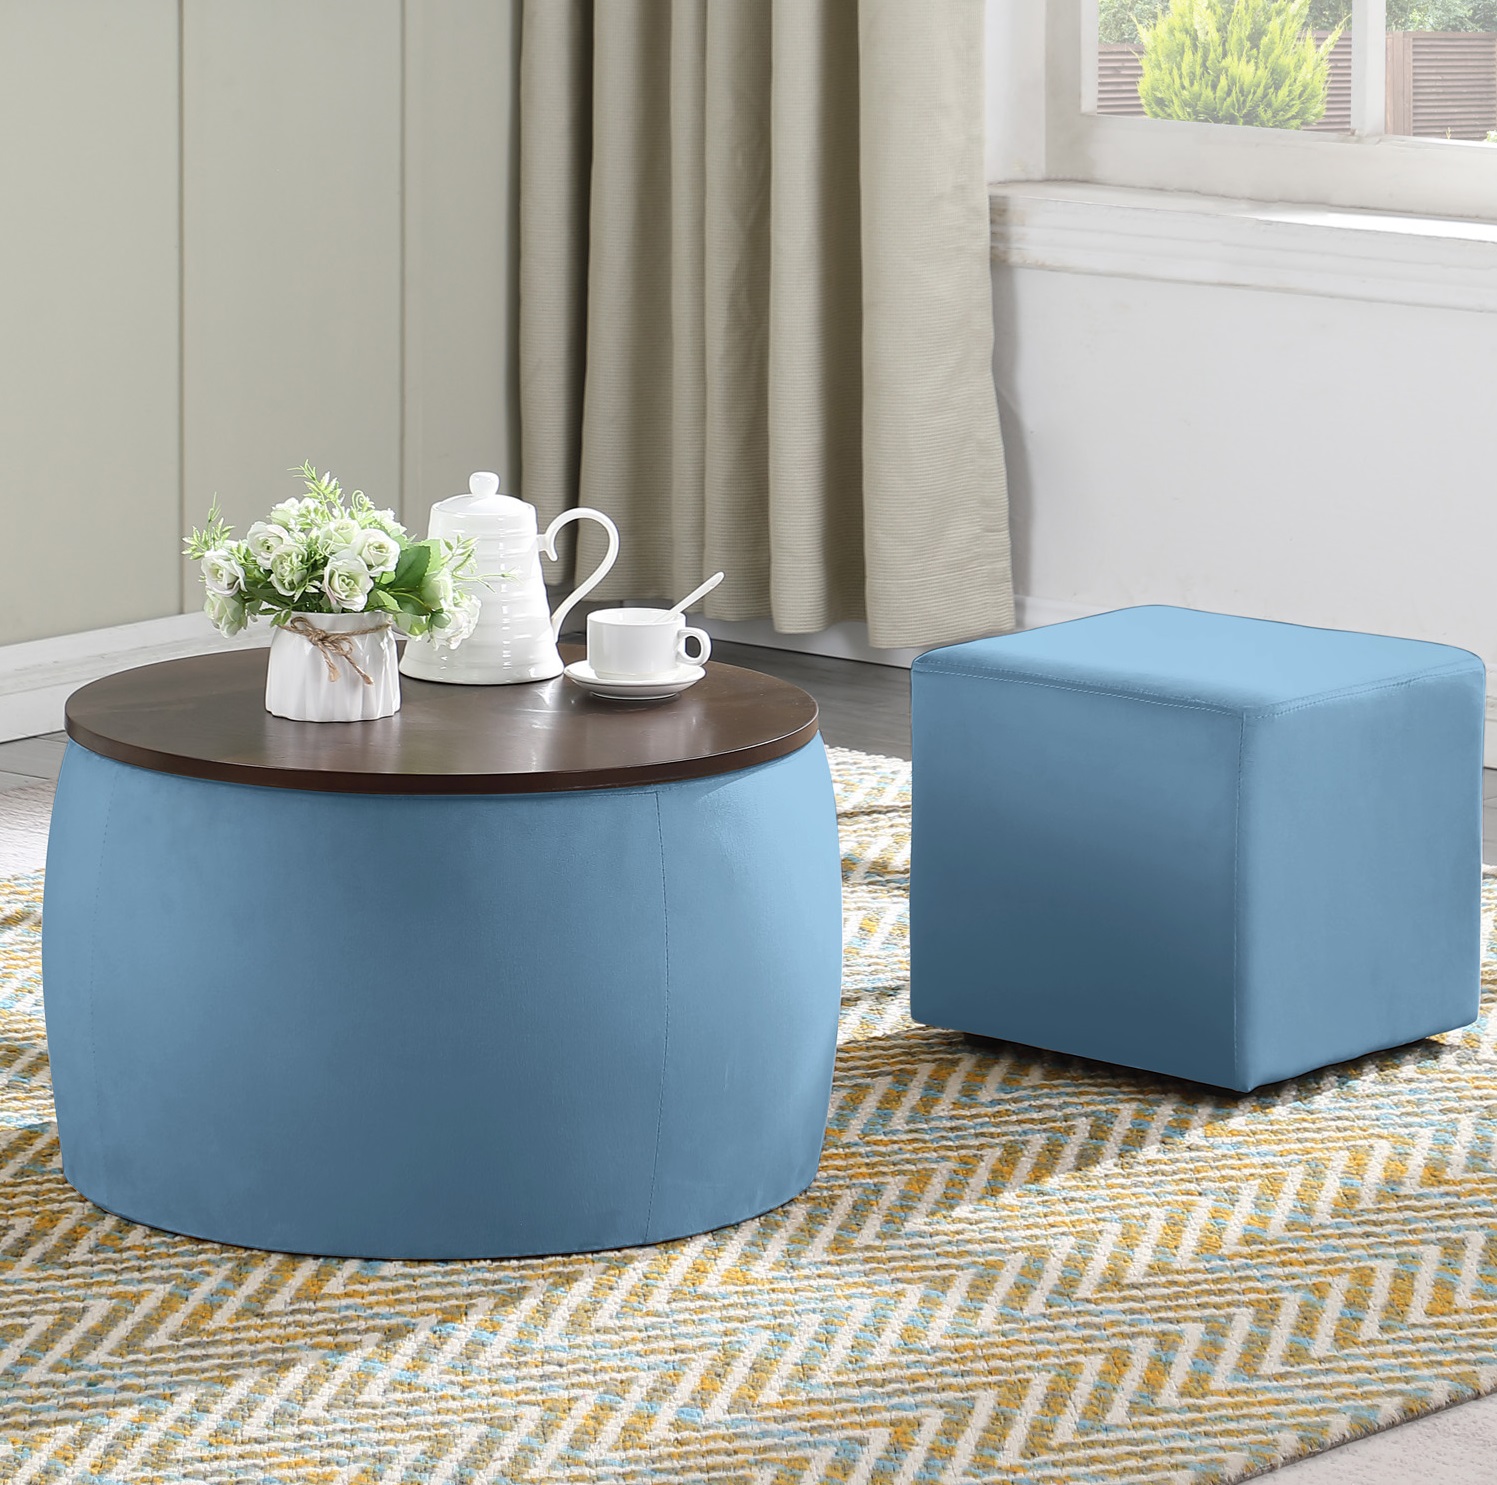 2 in 1 Storage Ottoman with Tray, Round Ottoman Coffee Table with Foot Rest, Cube Organizer, End Table for Living Room, LJ421 - image 1 of 6